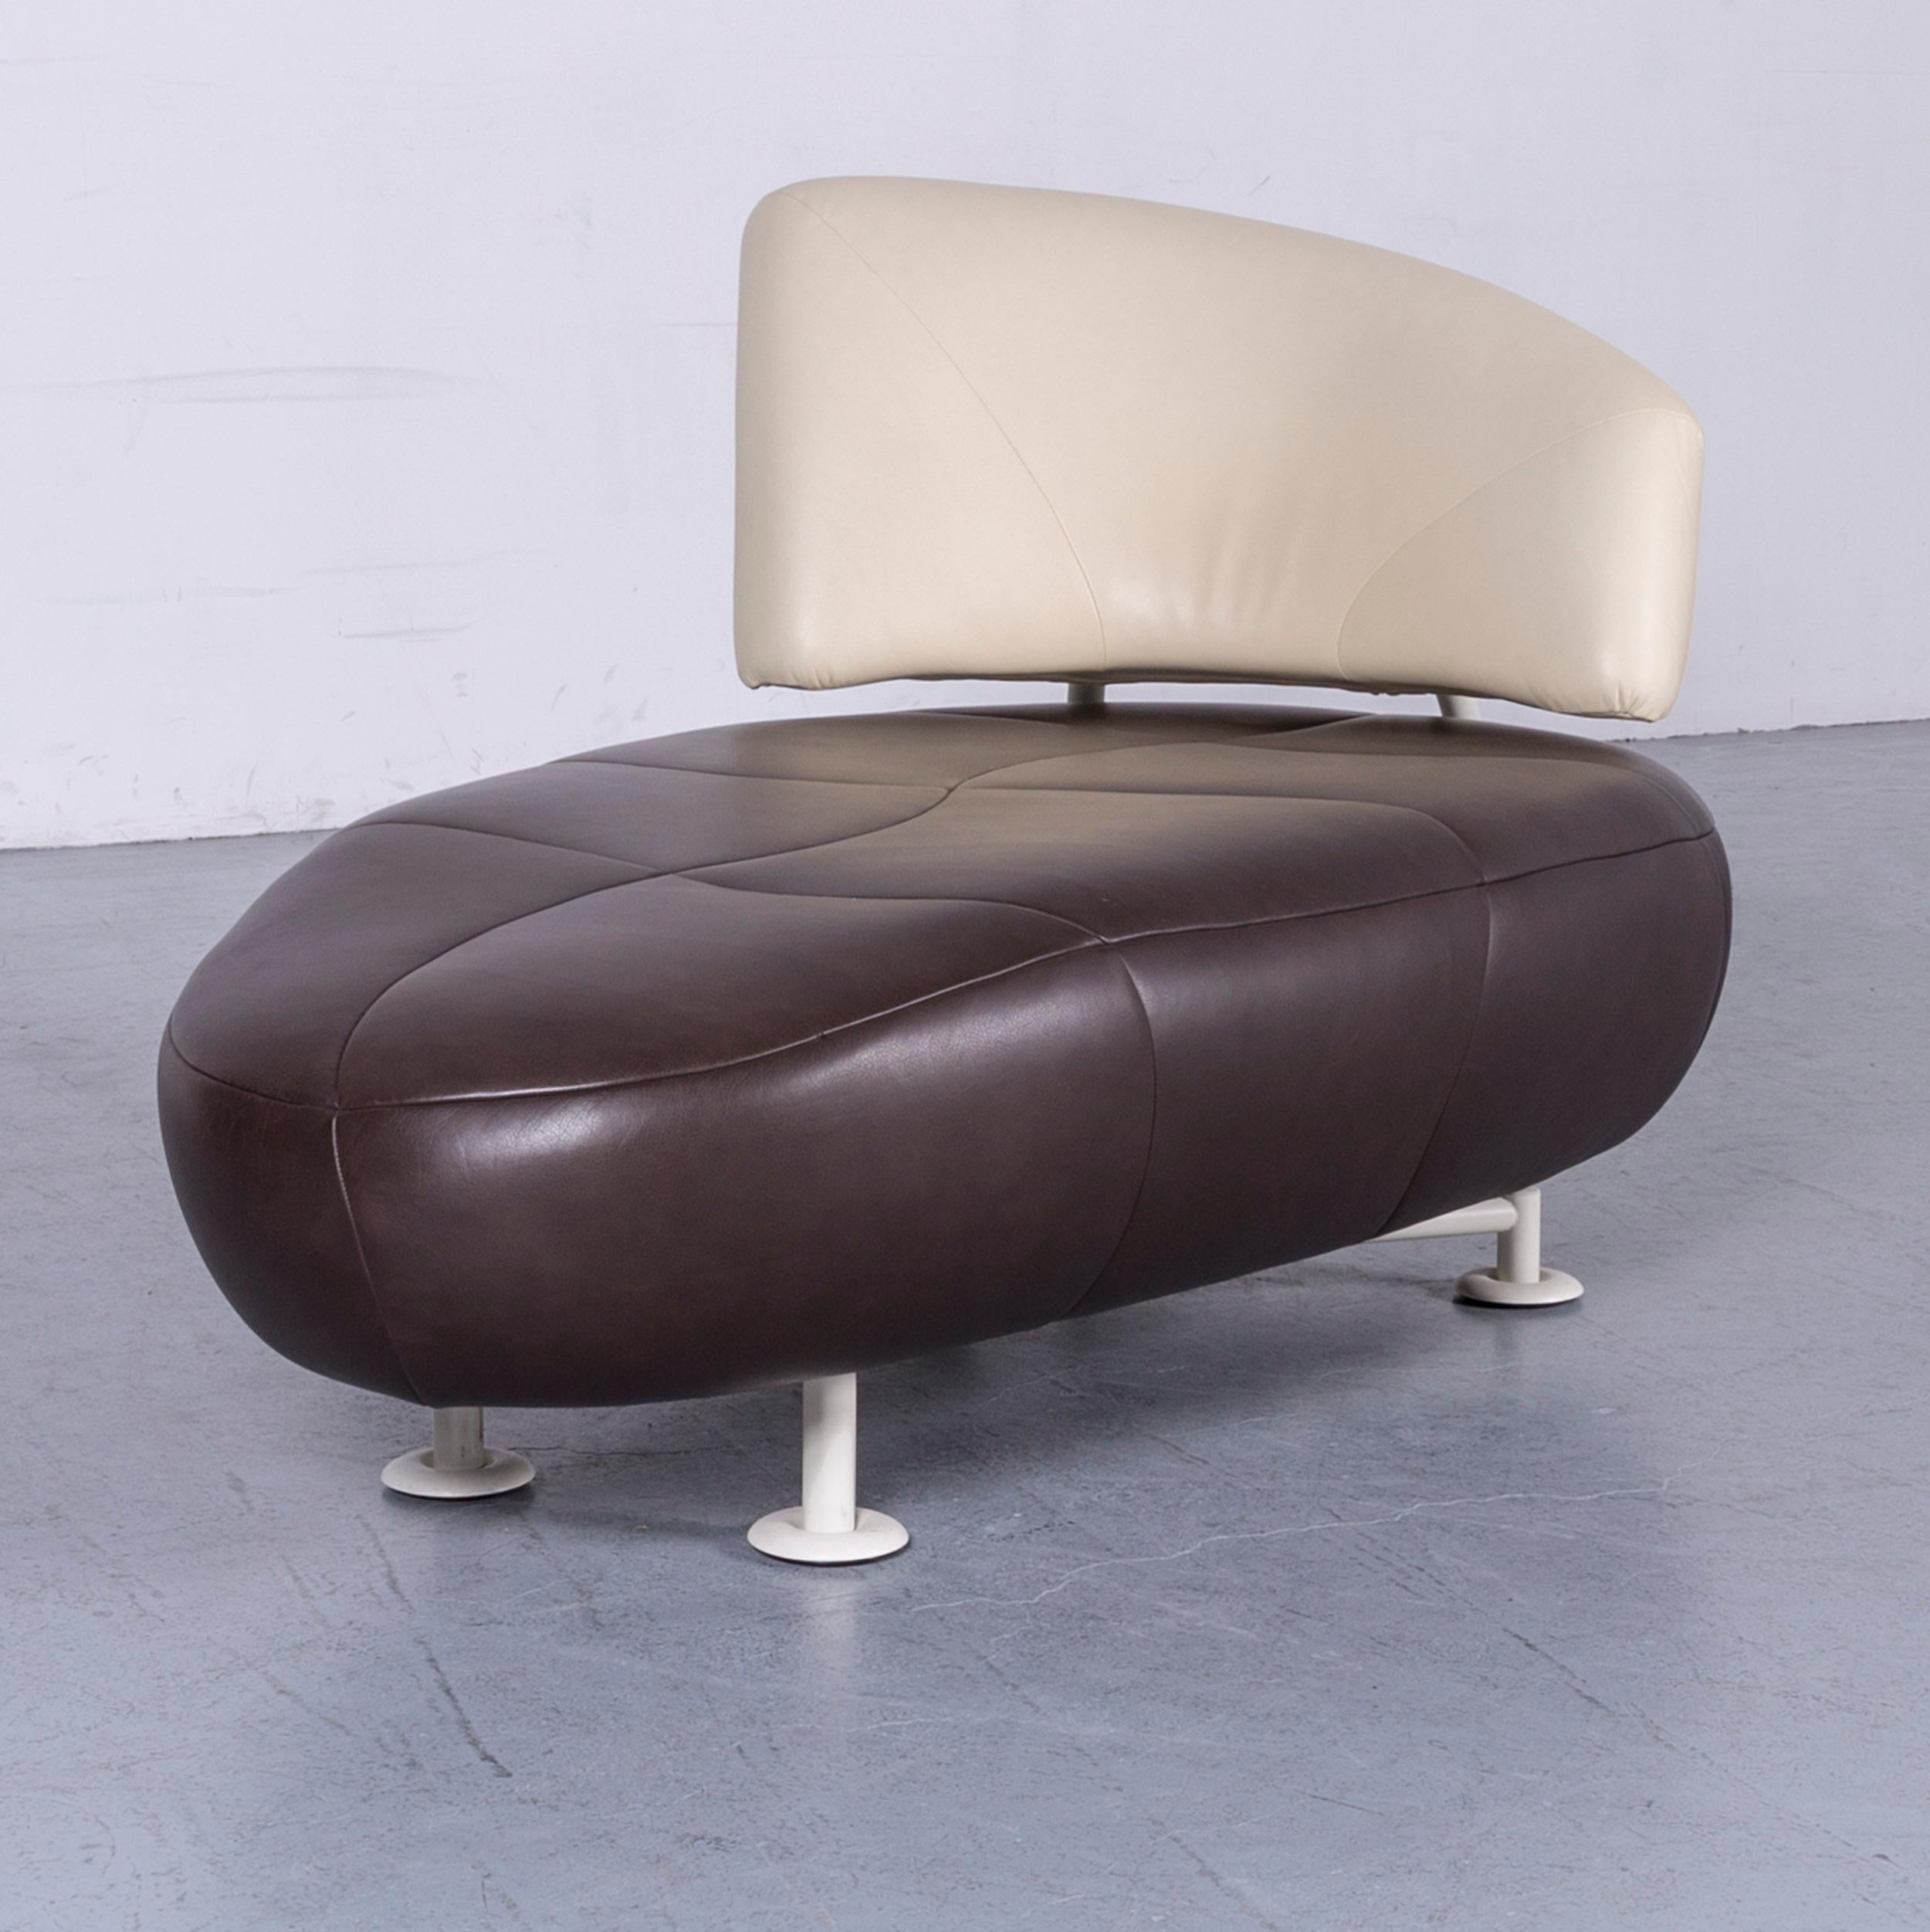 We bring to you an Leolux Kikko designer sofa leather brown two-seat couch modern.